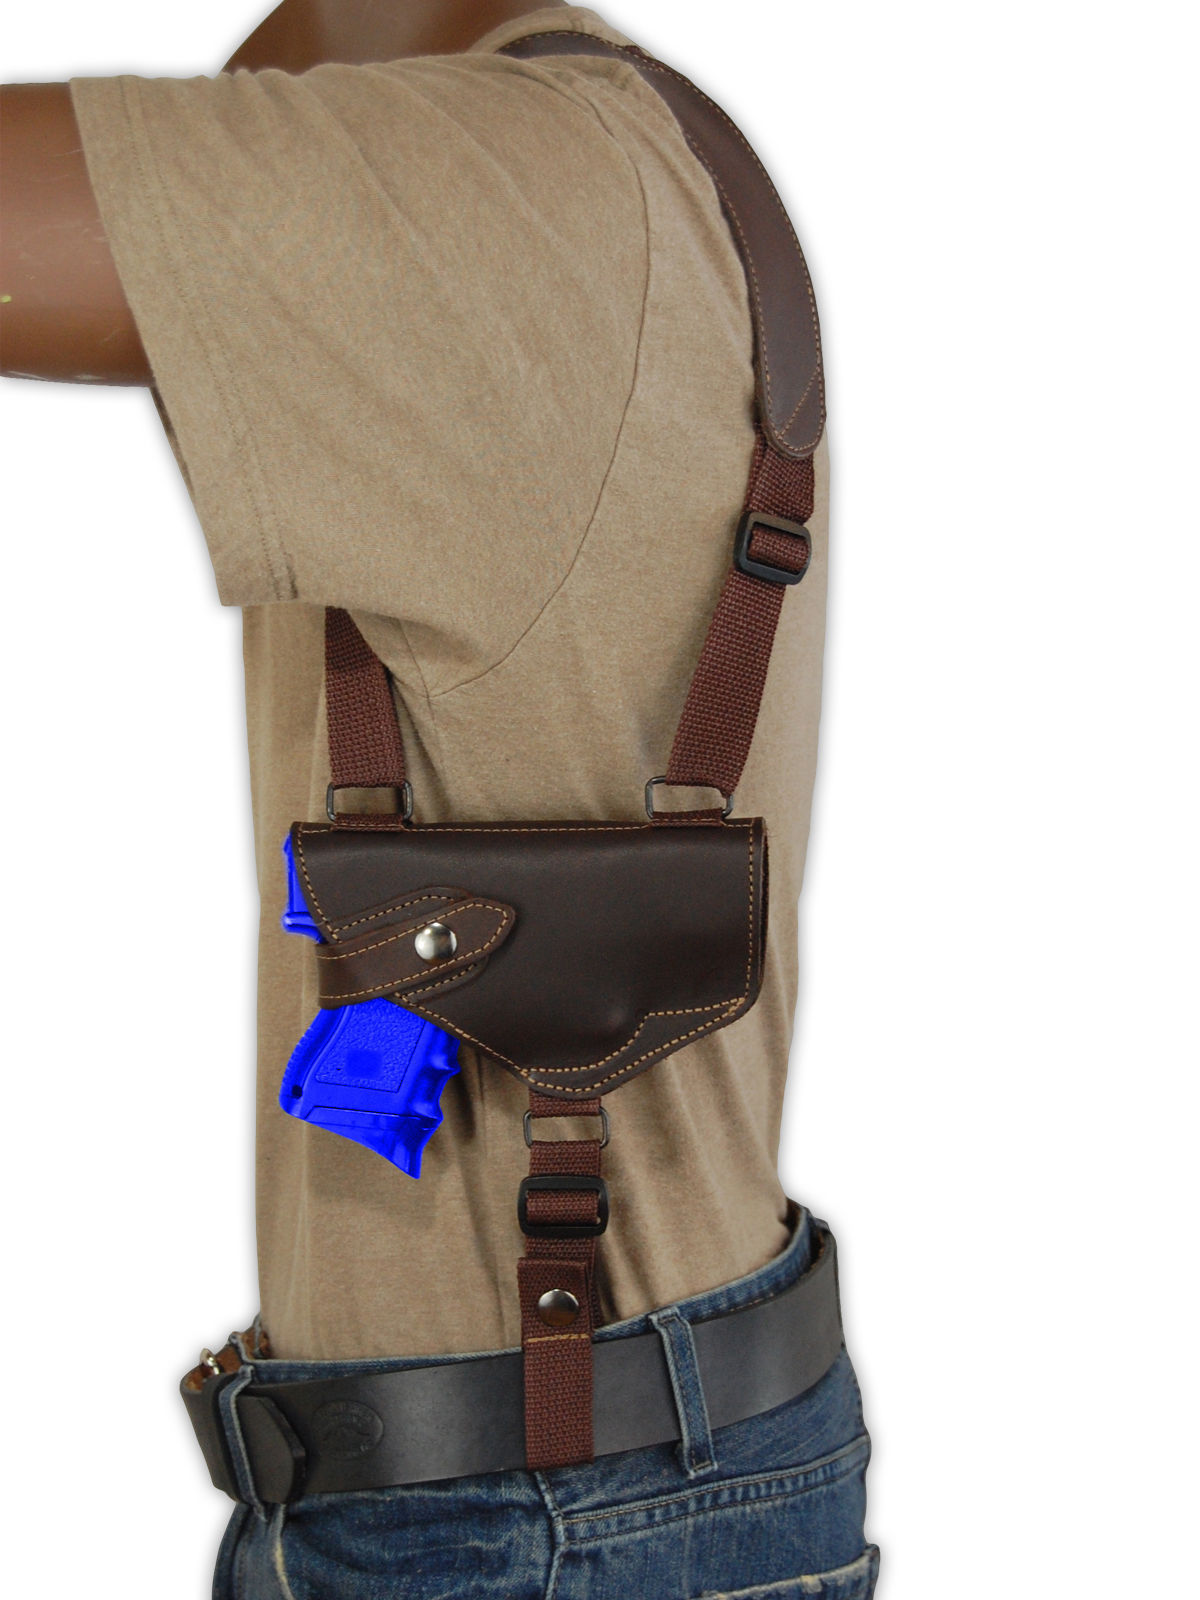 NEW Barsony Horizontal Brown Leather Shoulder Holster Taurus Compact 9mm 40...